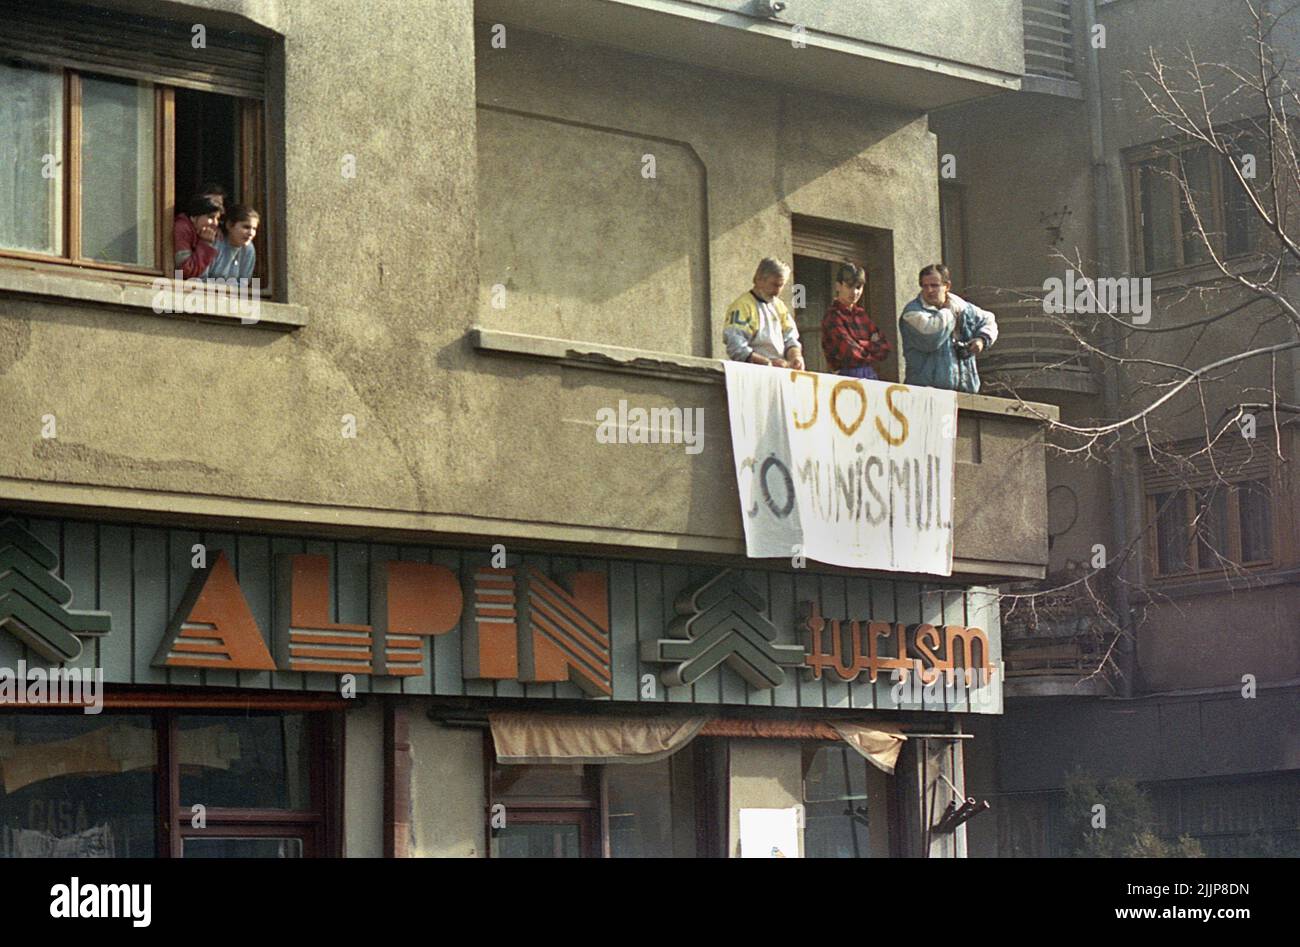 Bucharest, Romania, January 1990. People watching the protesters in downtown Bucharest from their apartment, displaying a banner that says 'Down with communism'. After the anti-communist revolution of December 1989, the civic unrest continued, as most of the new people in power were the former communist officials. Stock Photo